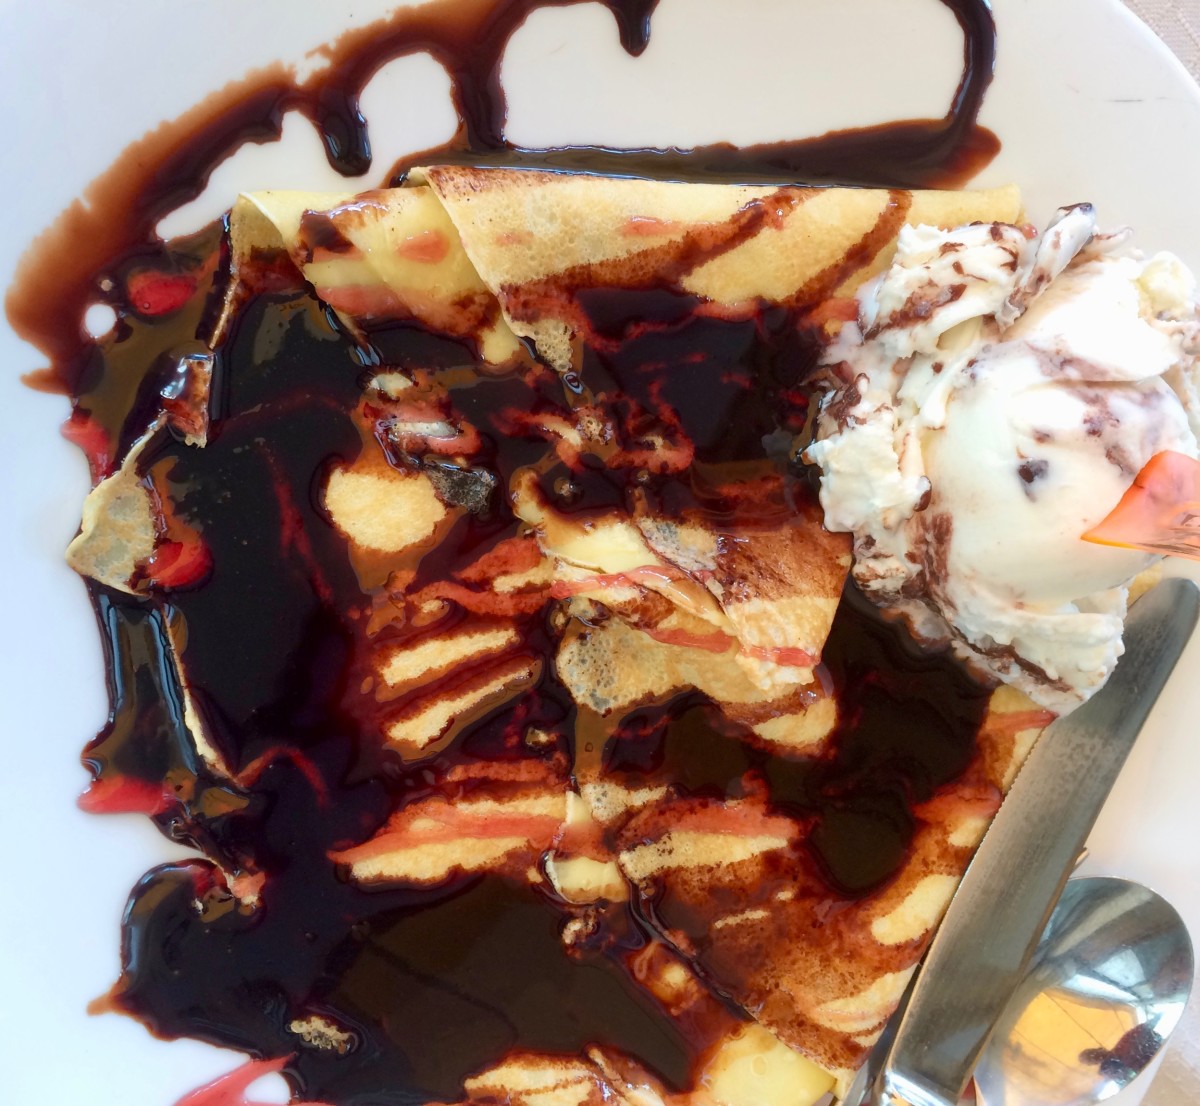 Pancakes With Chocolate and Ice Cream